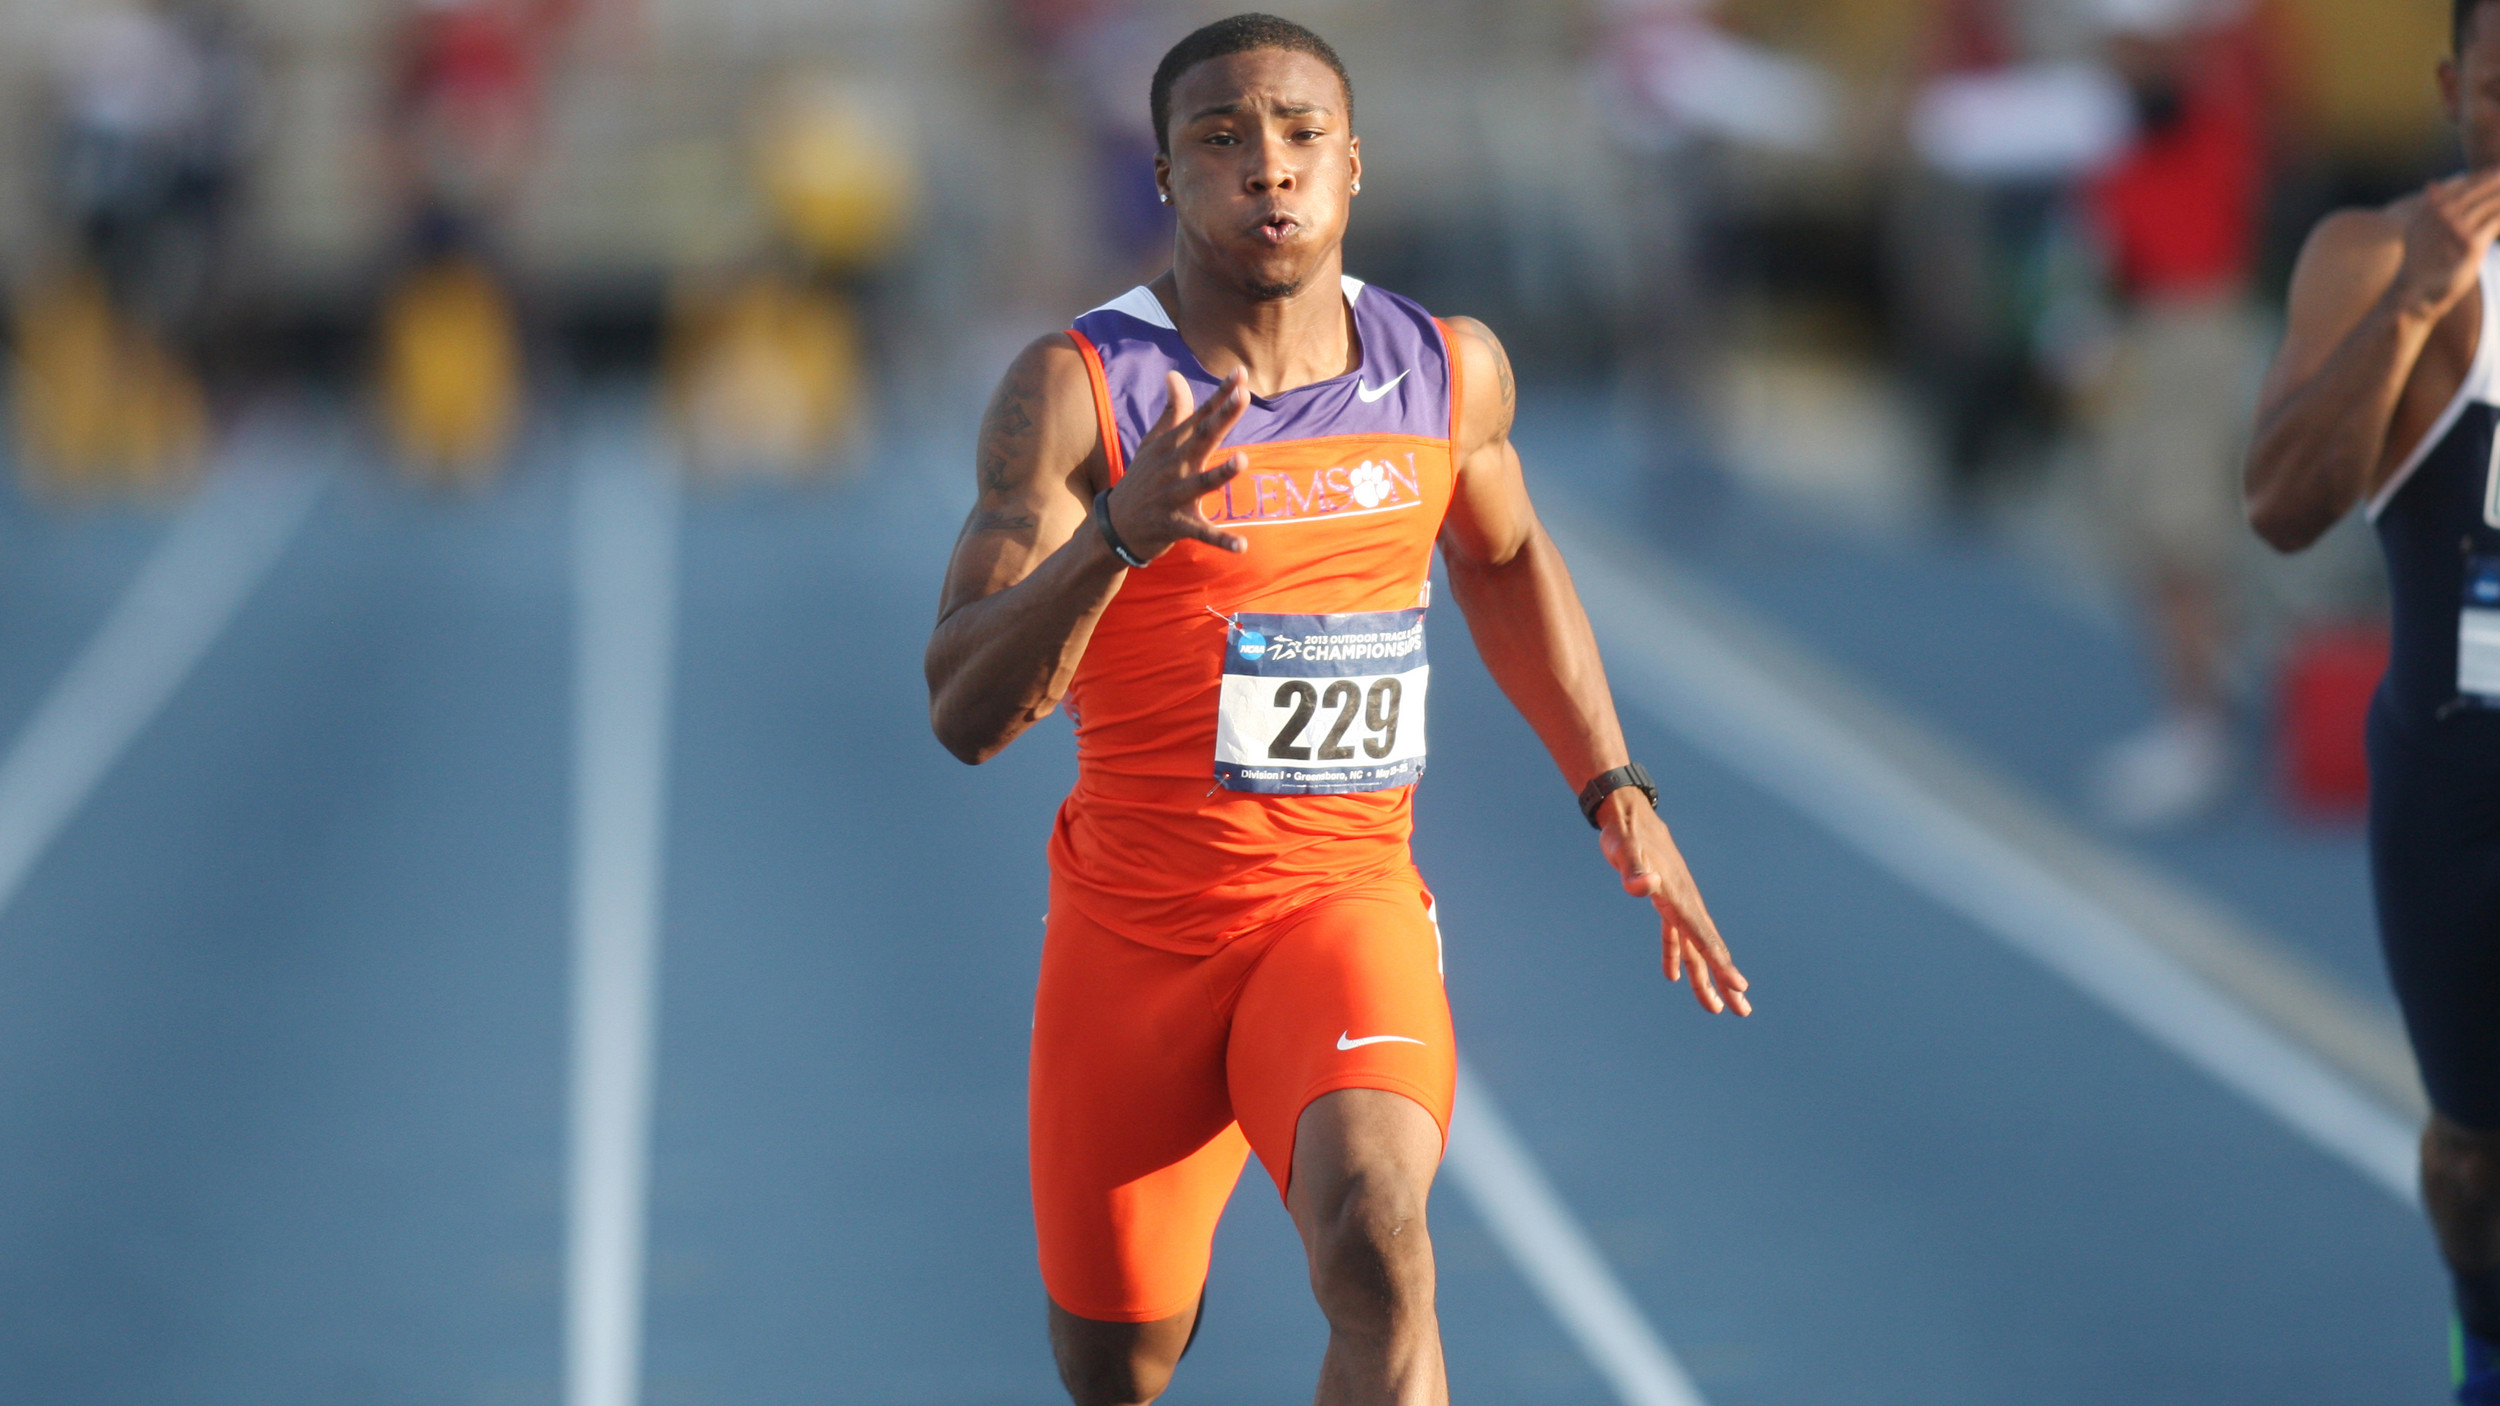 Tigers Return to Action at Three Different Meets